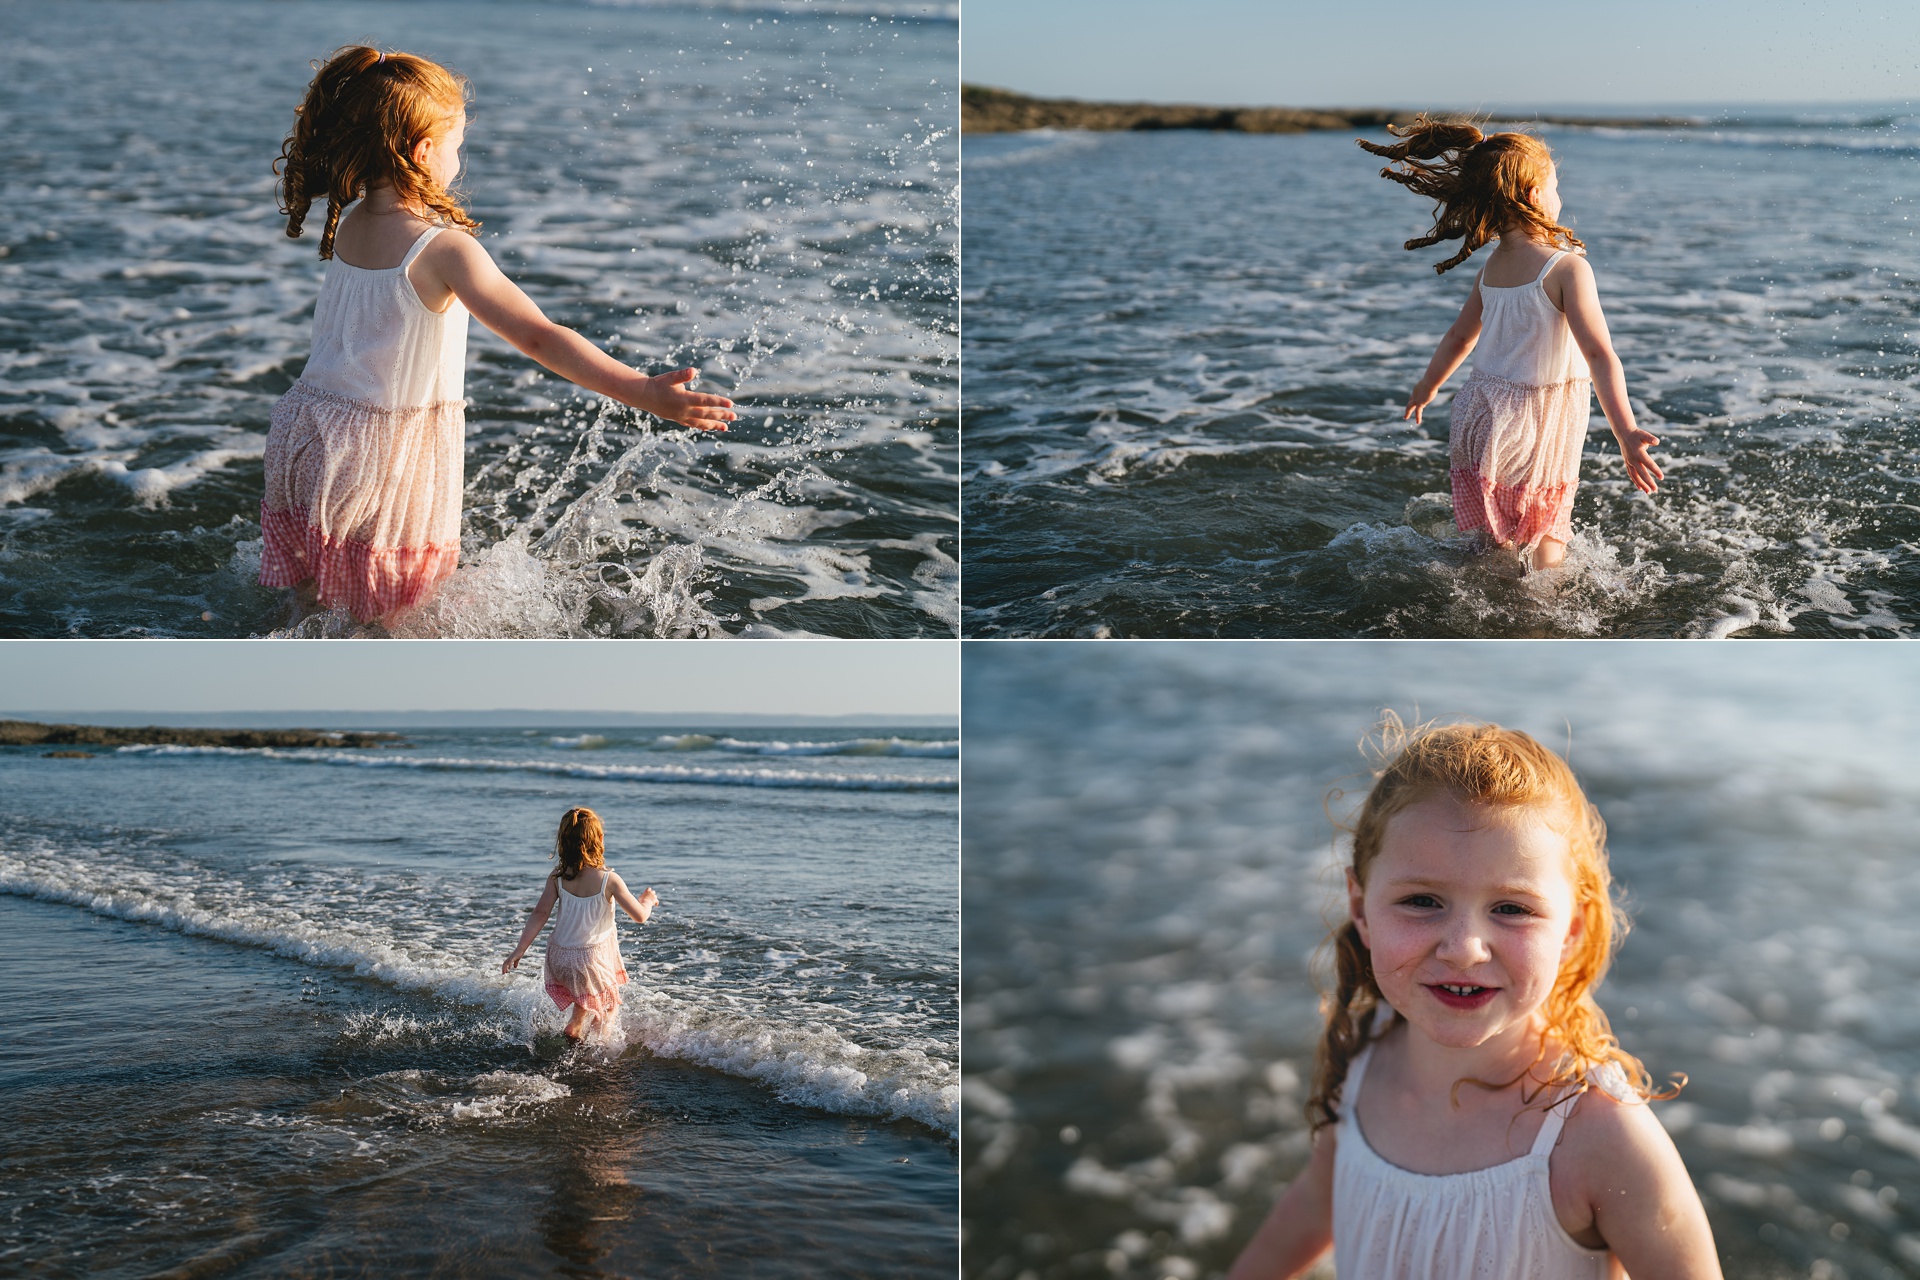 A young girl in a dress, jumping in the sea and splashing with the waves